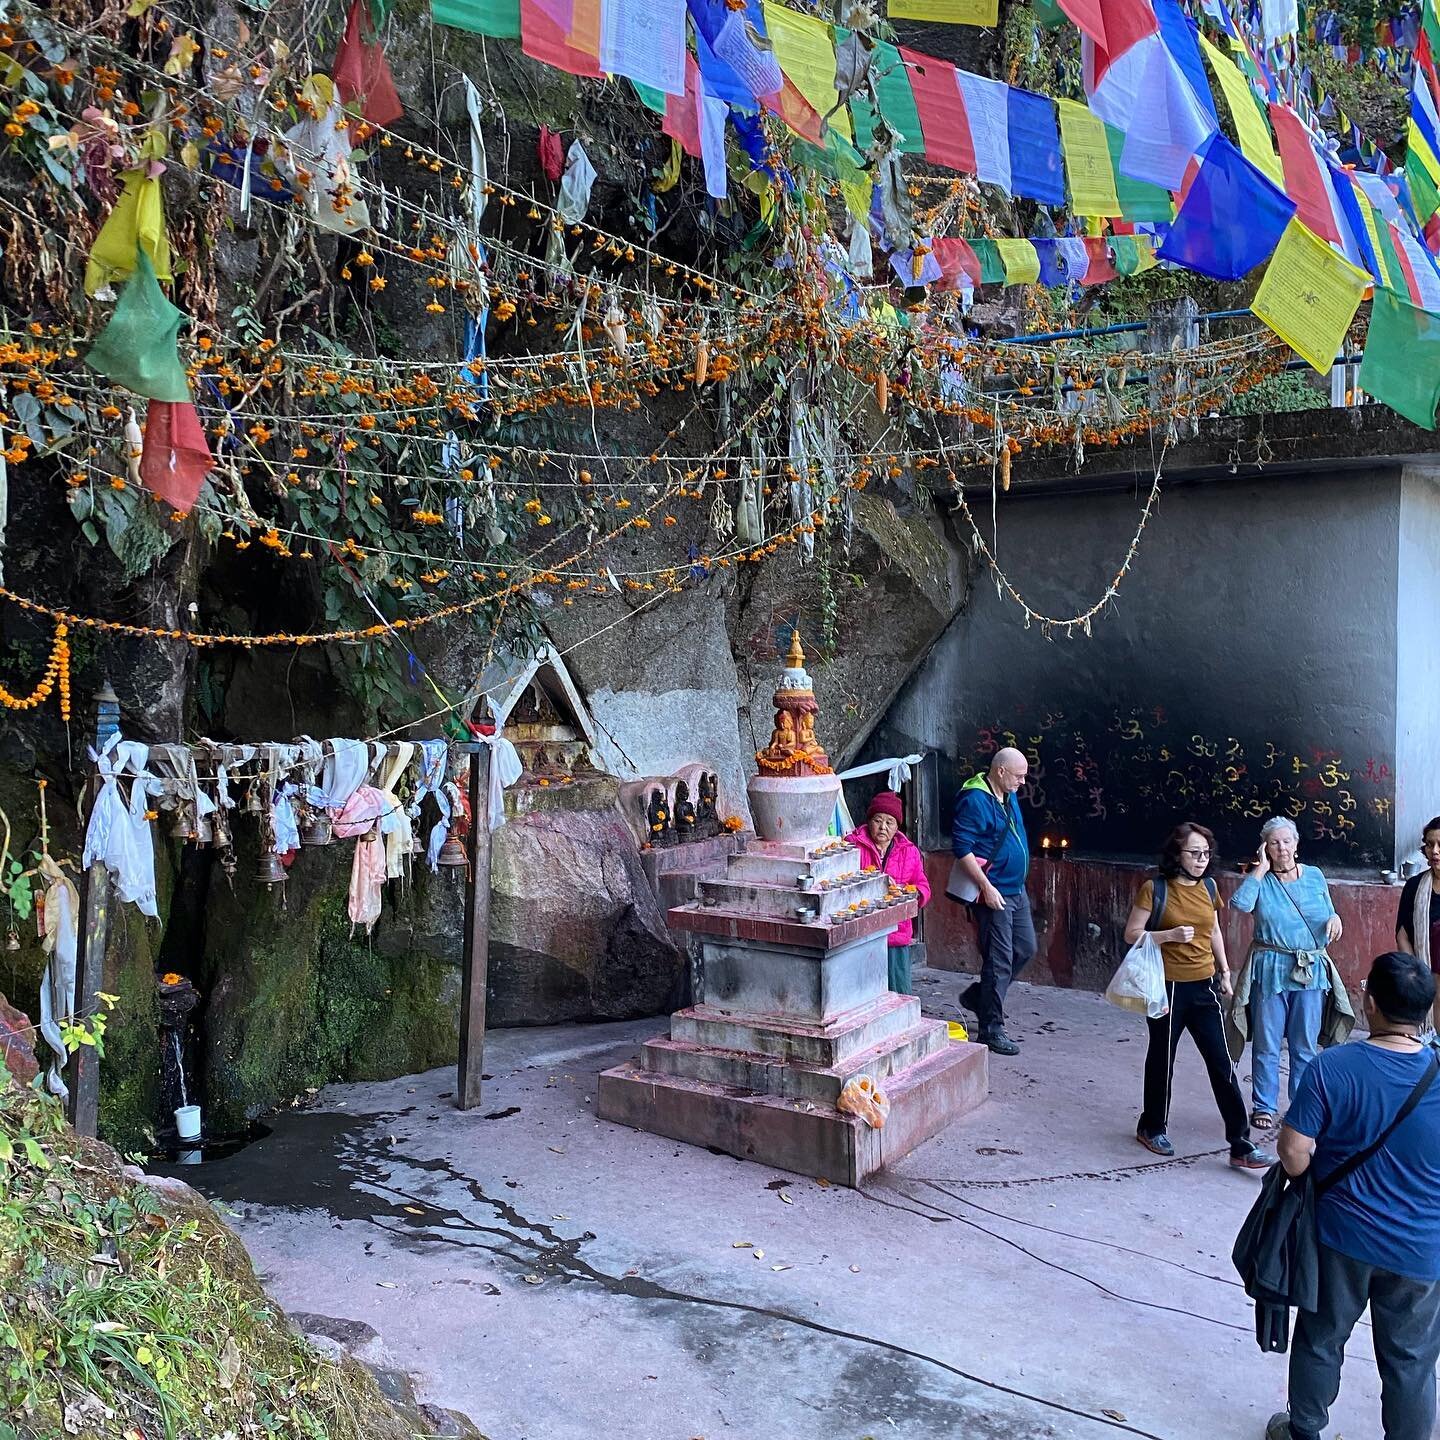 Our pilgrimage has brought us to Chumik Changchup, the Spring of Awakening, where Guru Padmasambhava tamed blood-thirsty demons and pacified the land, so that blessed water still flows to this day.
💙
We had the good fortune to spend some joyful mome